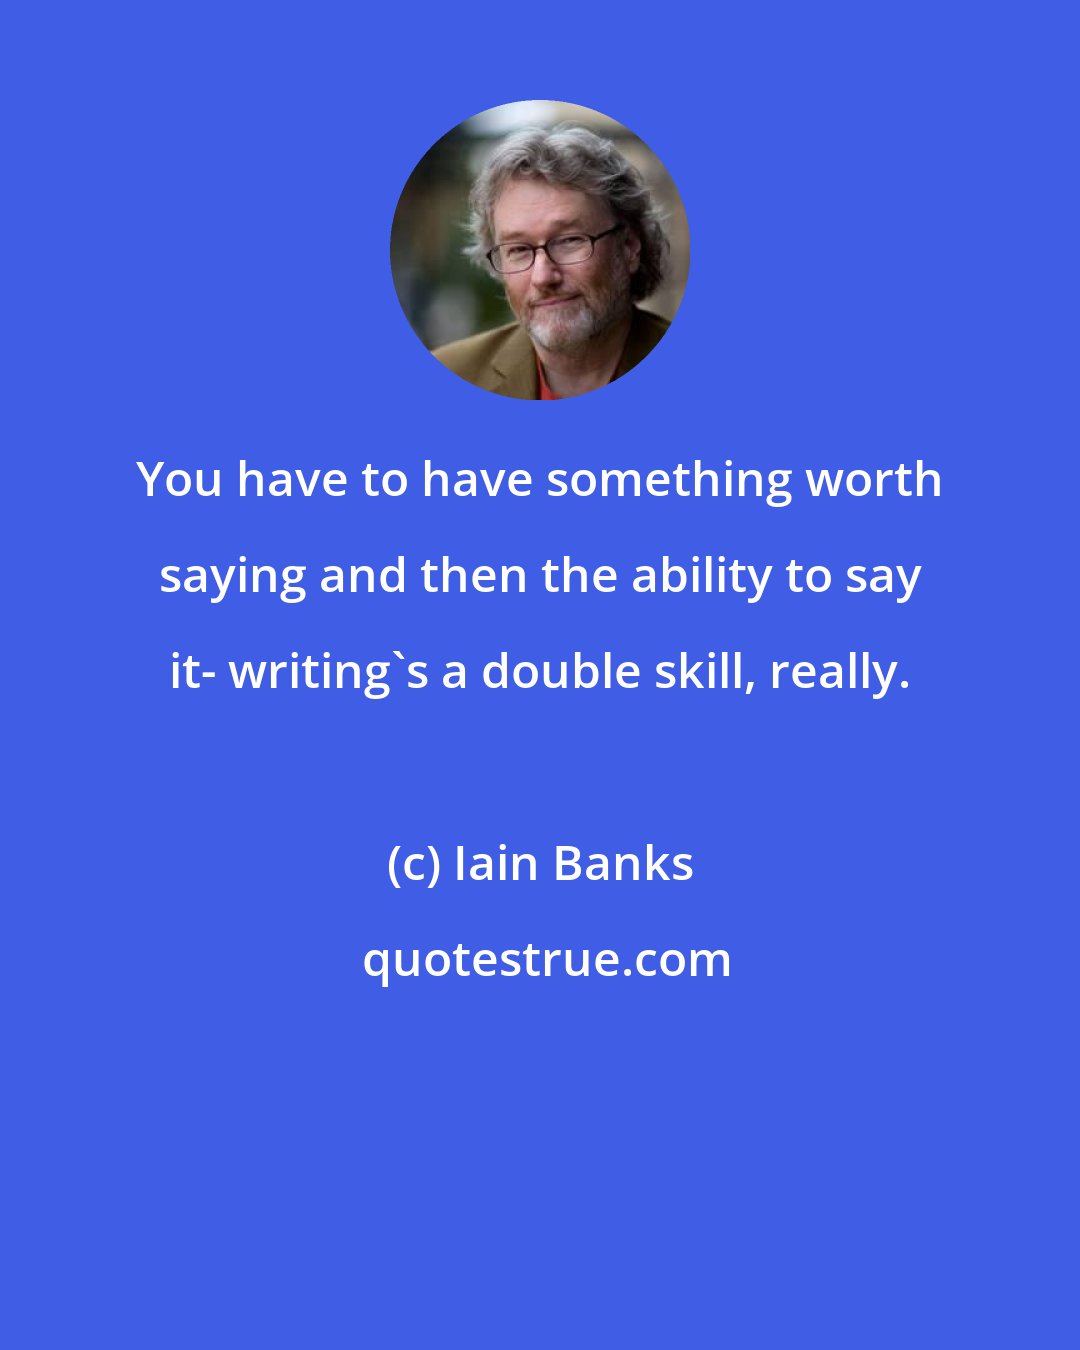 Iain Banks: You have to have something worth saying and then the ability to say it- writing's a double skill, really.